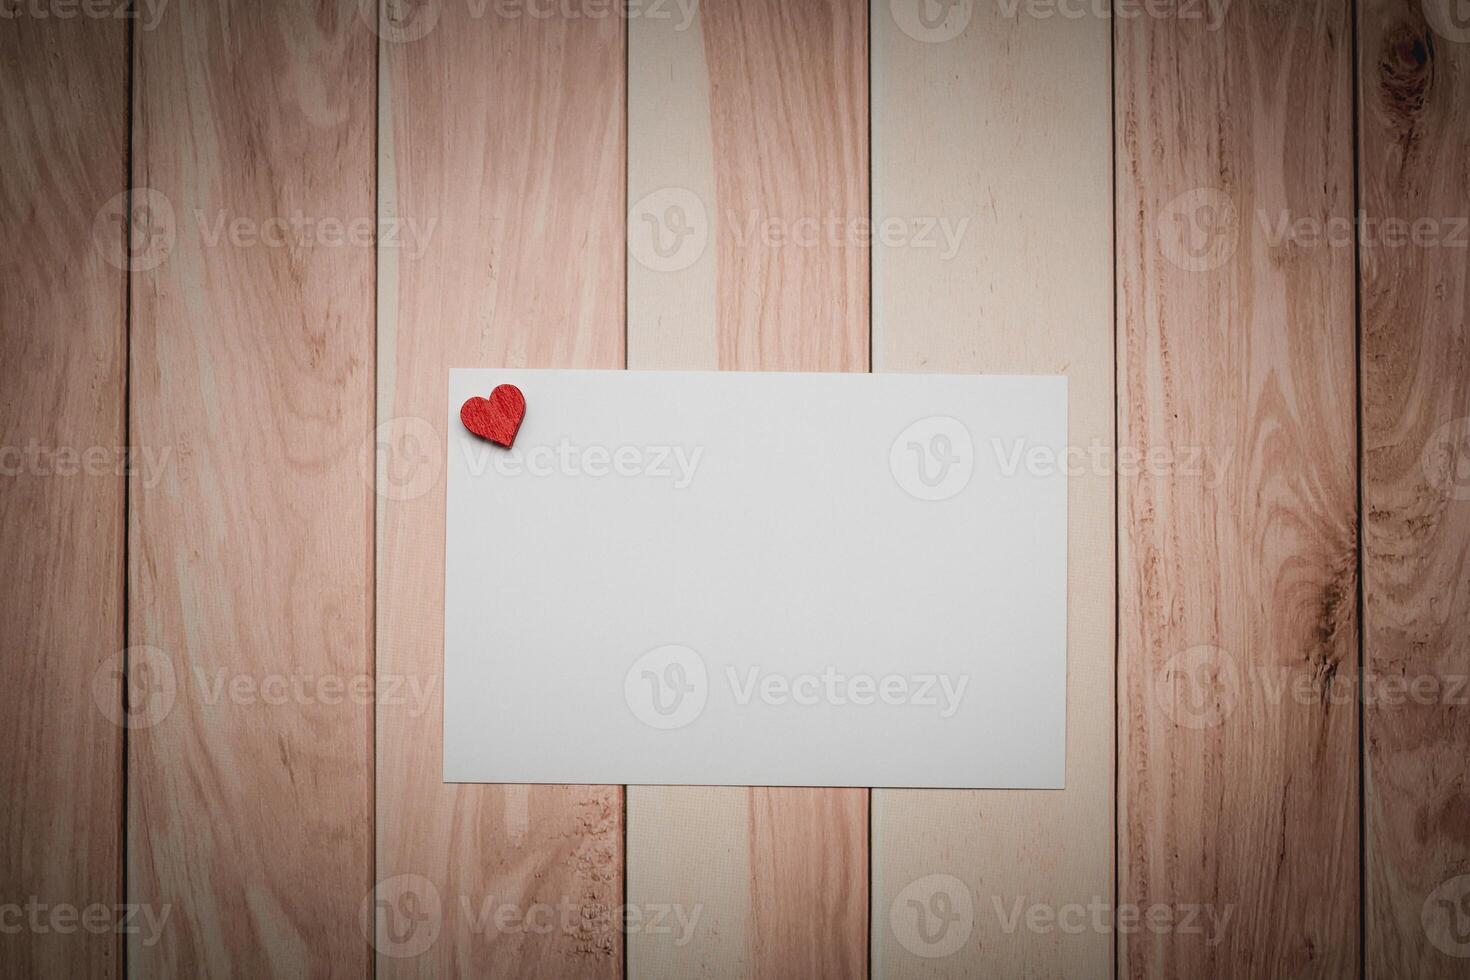 A white paper with a red heart placed on a wooden table photo